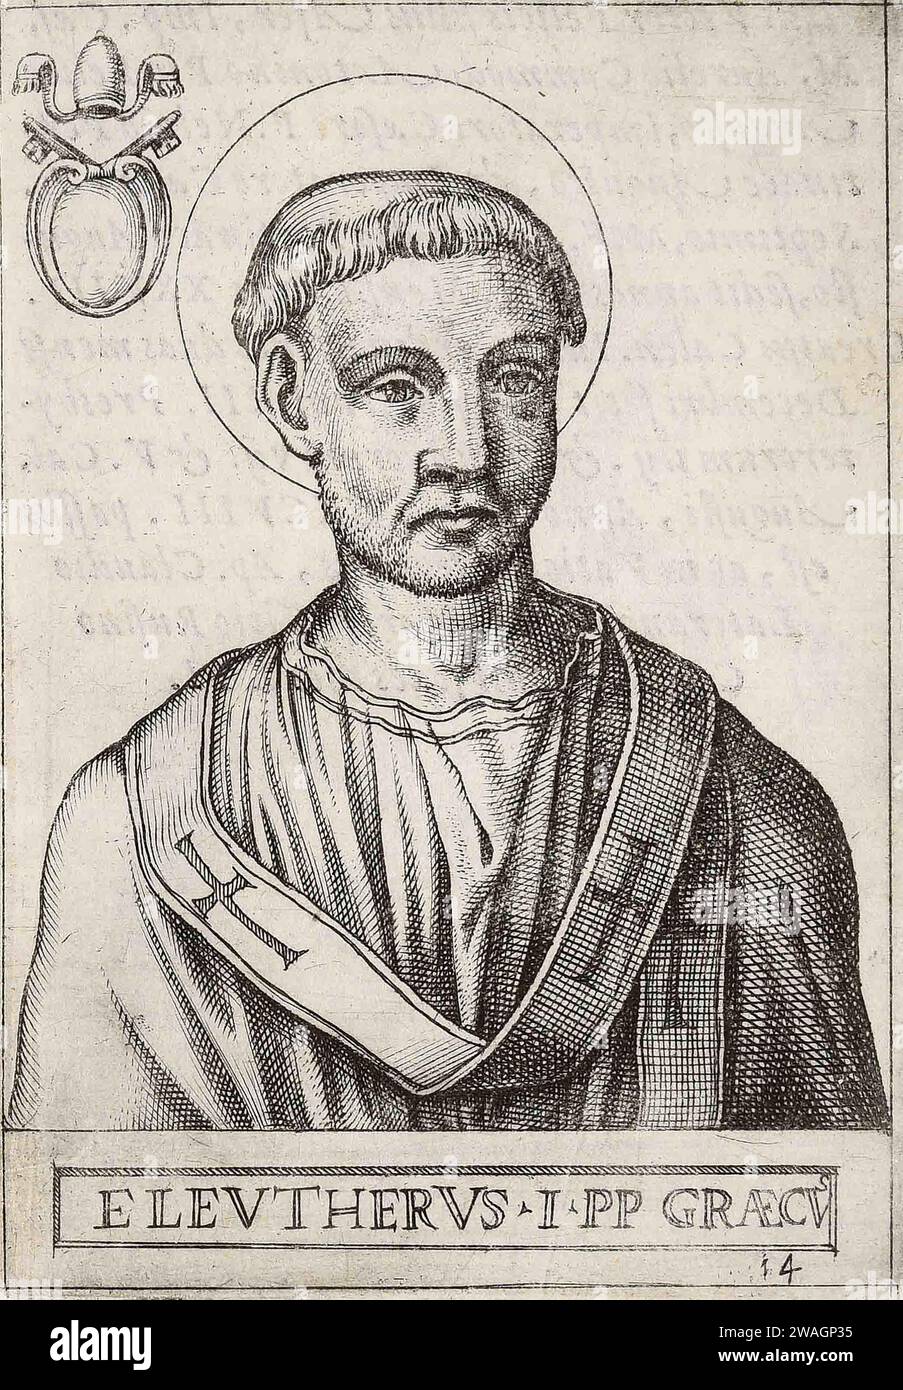 A 1580 illustration of Pope Eleutherius, who was pontiff from AD174 to AD189. He was the thirteenth pope. Stock Photo